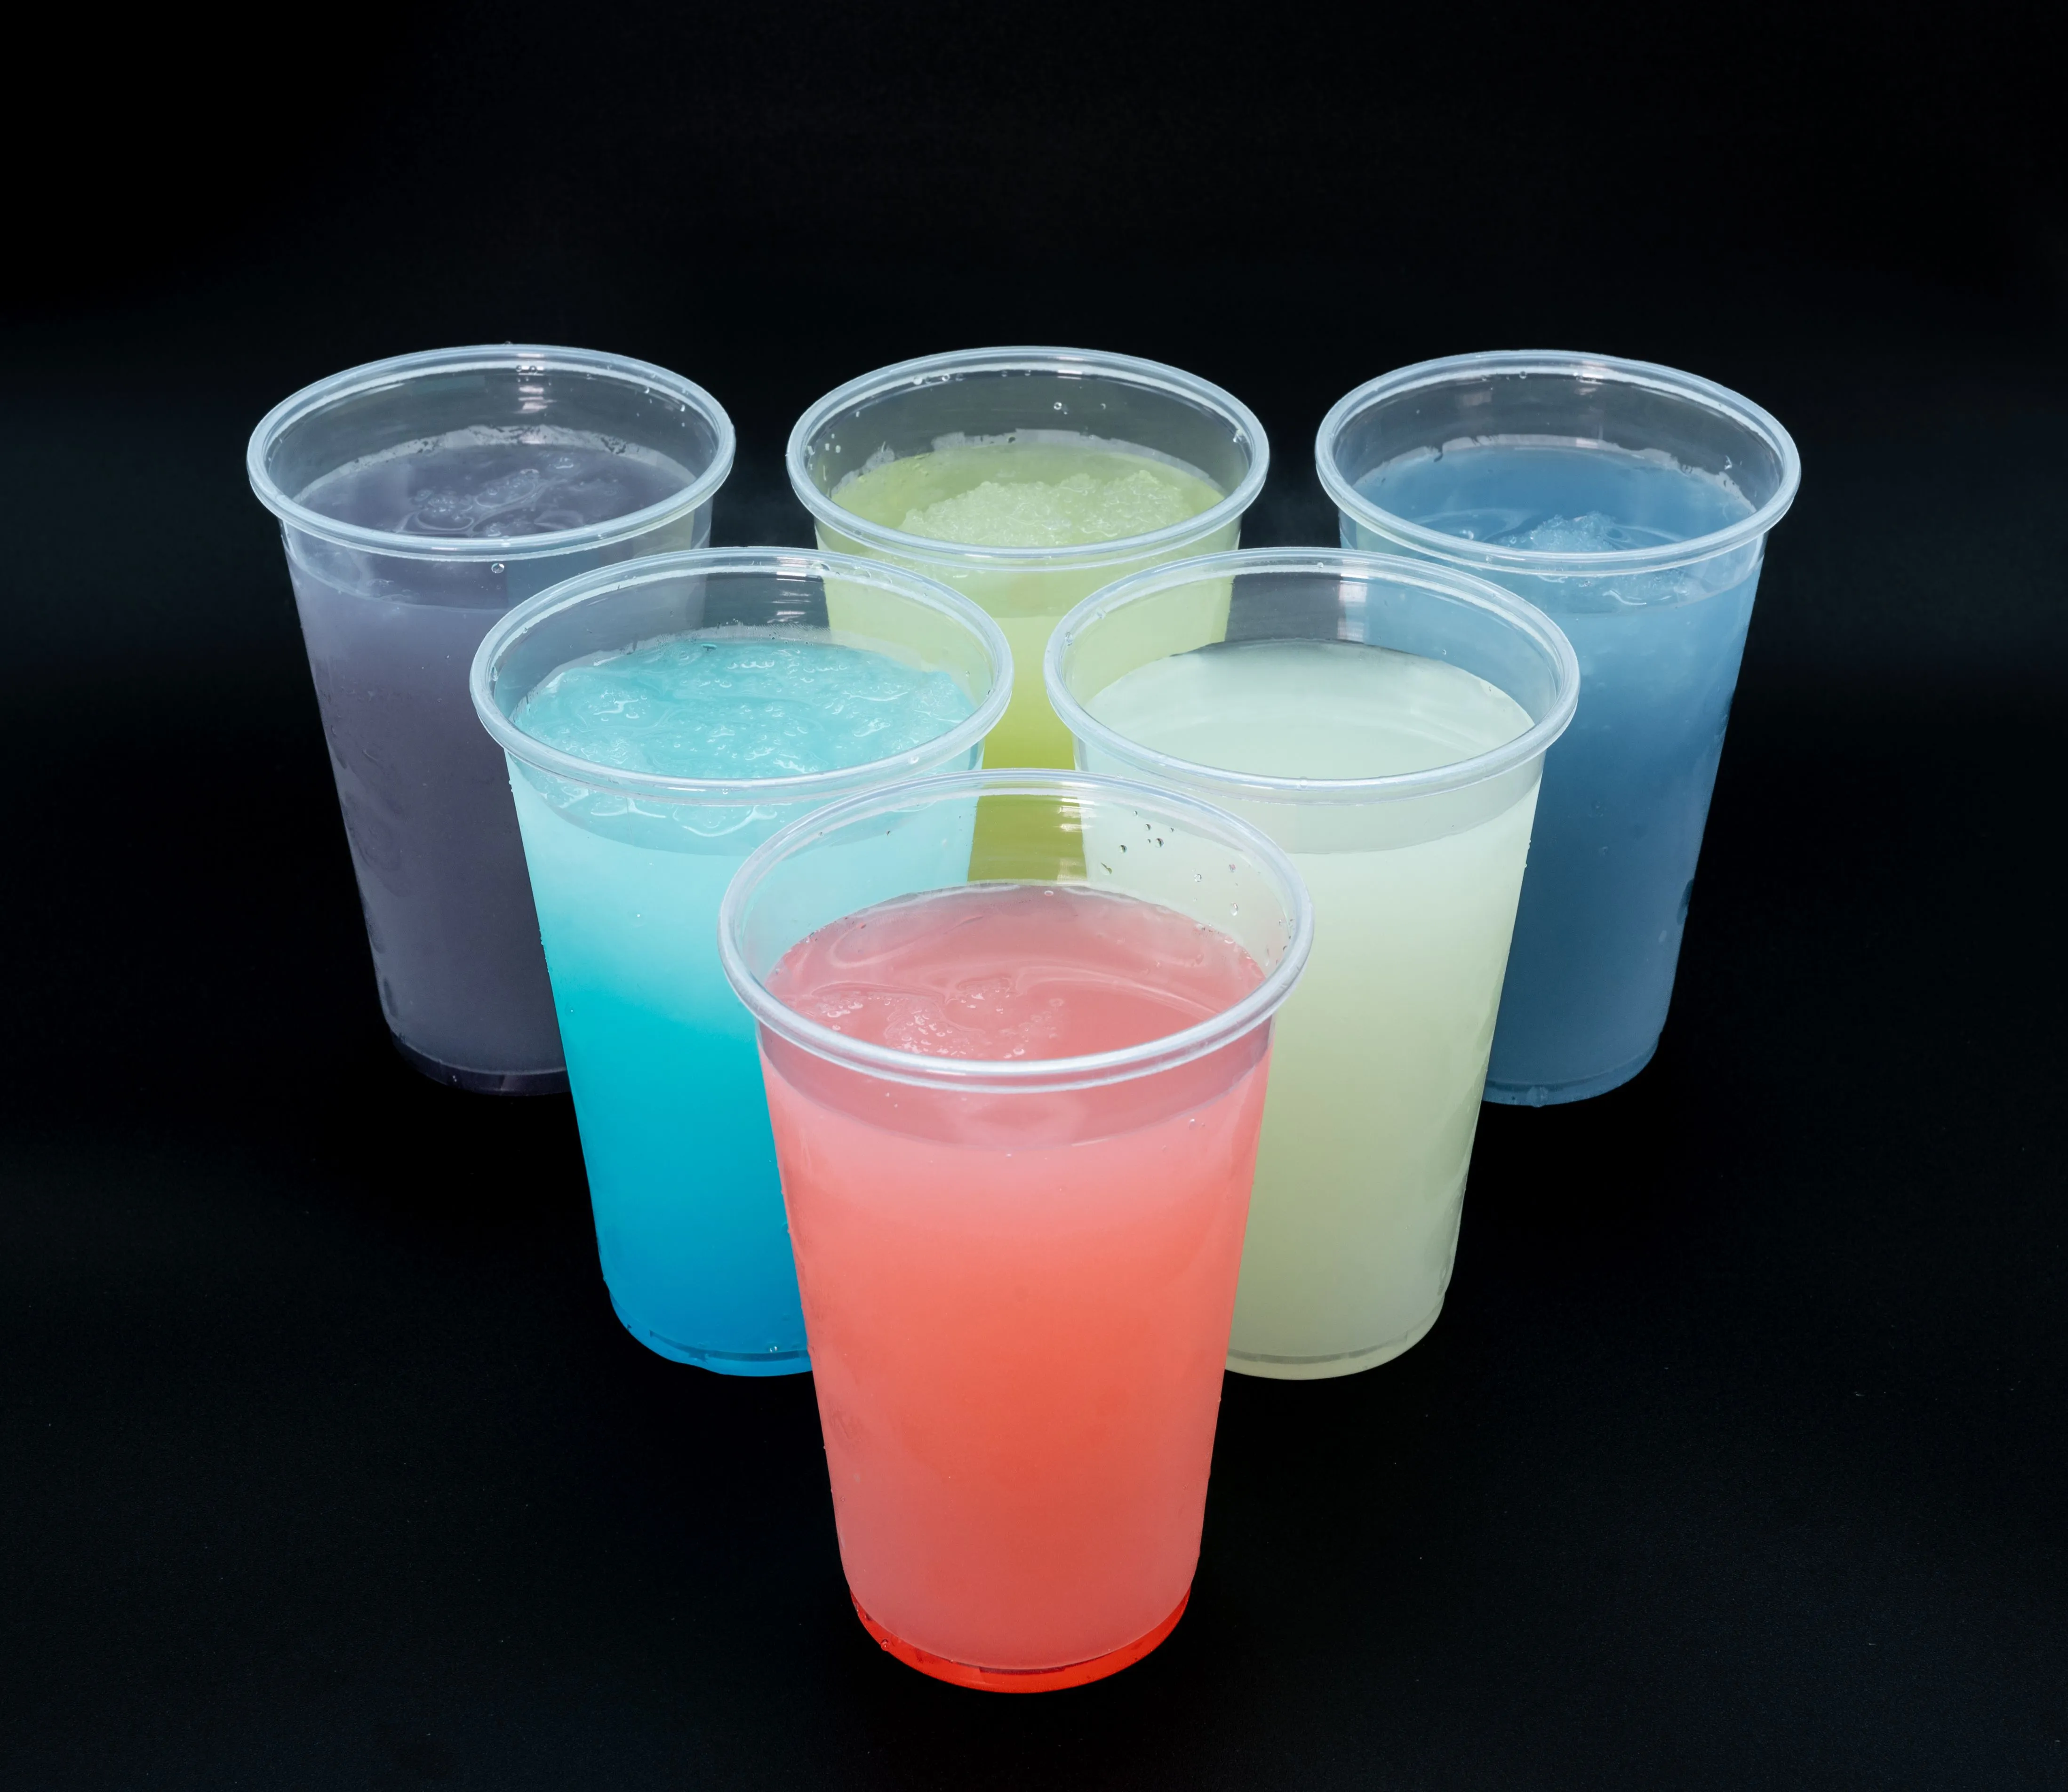 Seven colorful drinks in clear plastic cups on a black background.